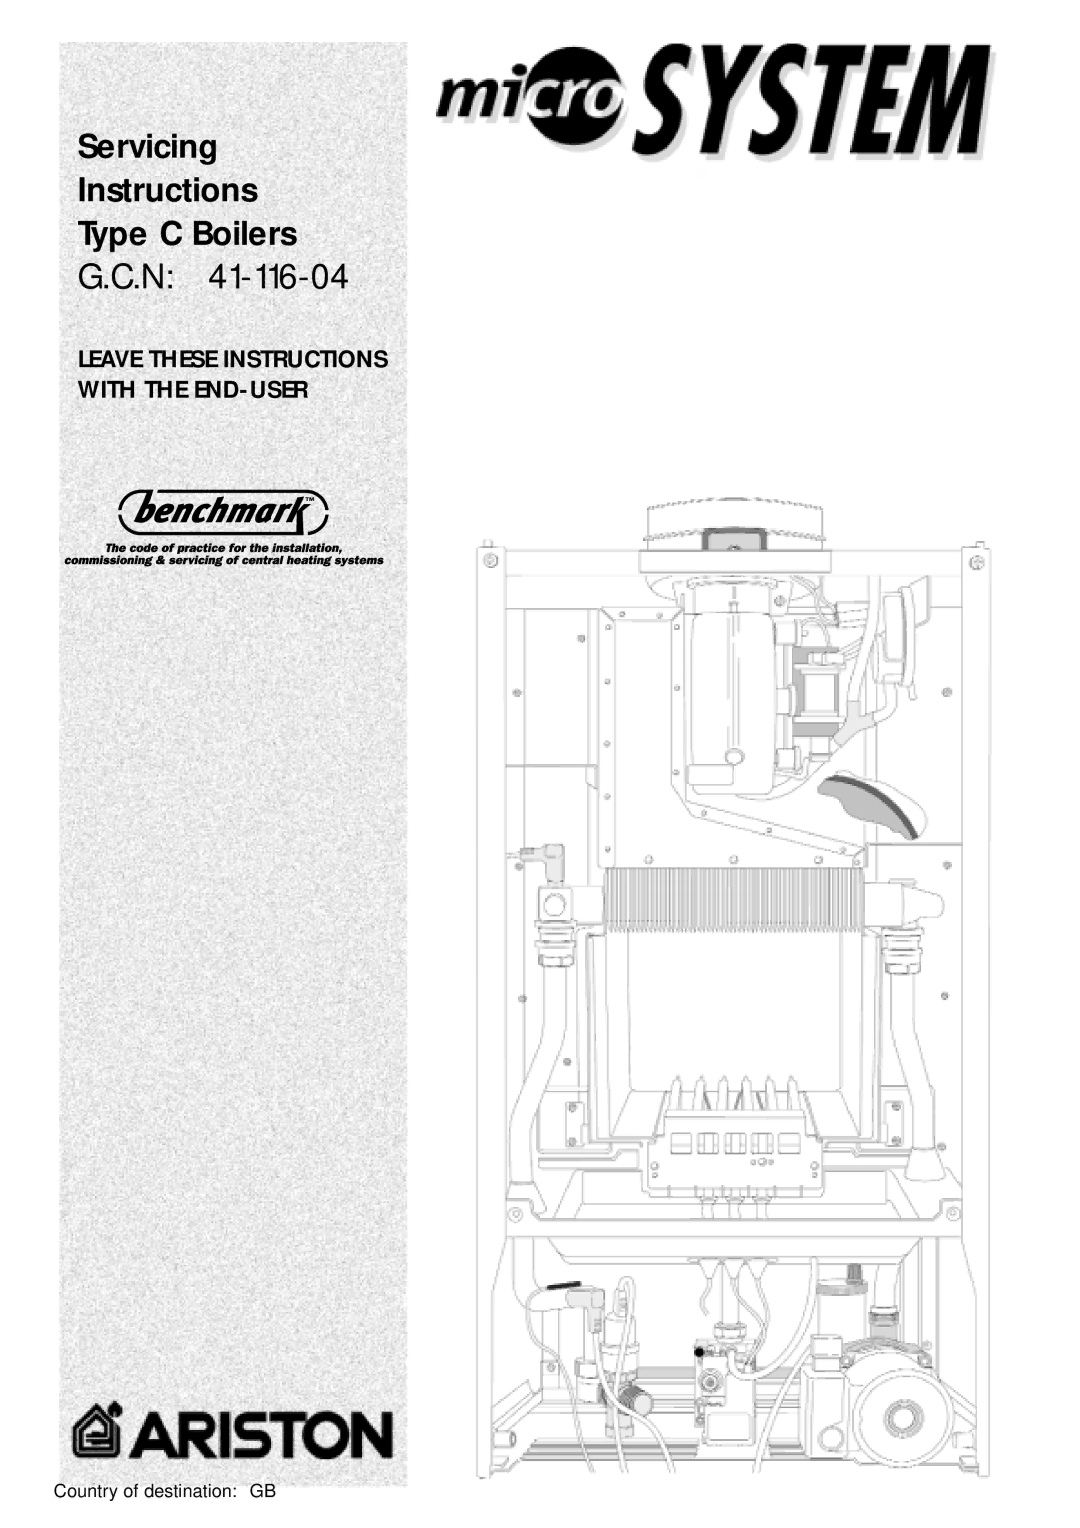 Ariston 41-116-04 installation instructions Servicing Instructions Type C Boilers 